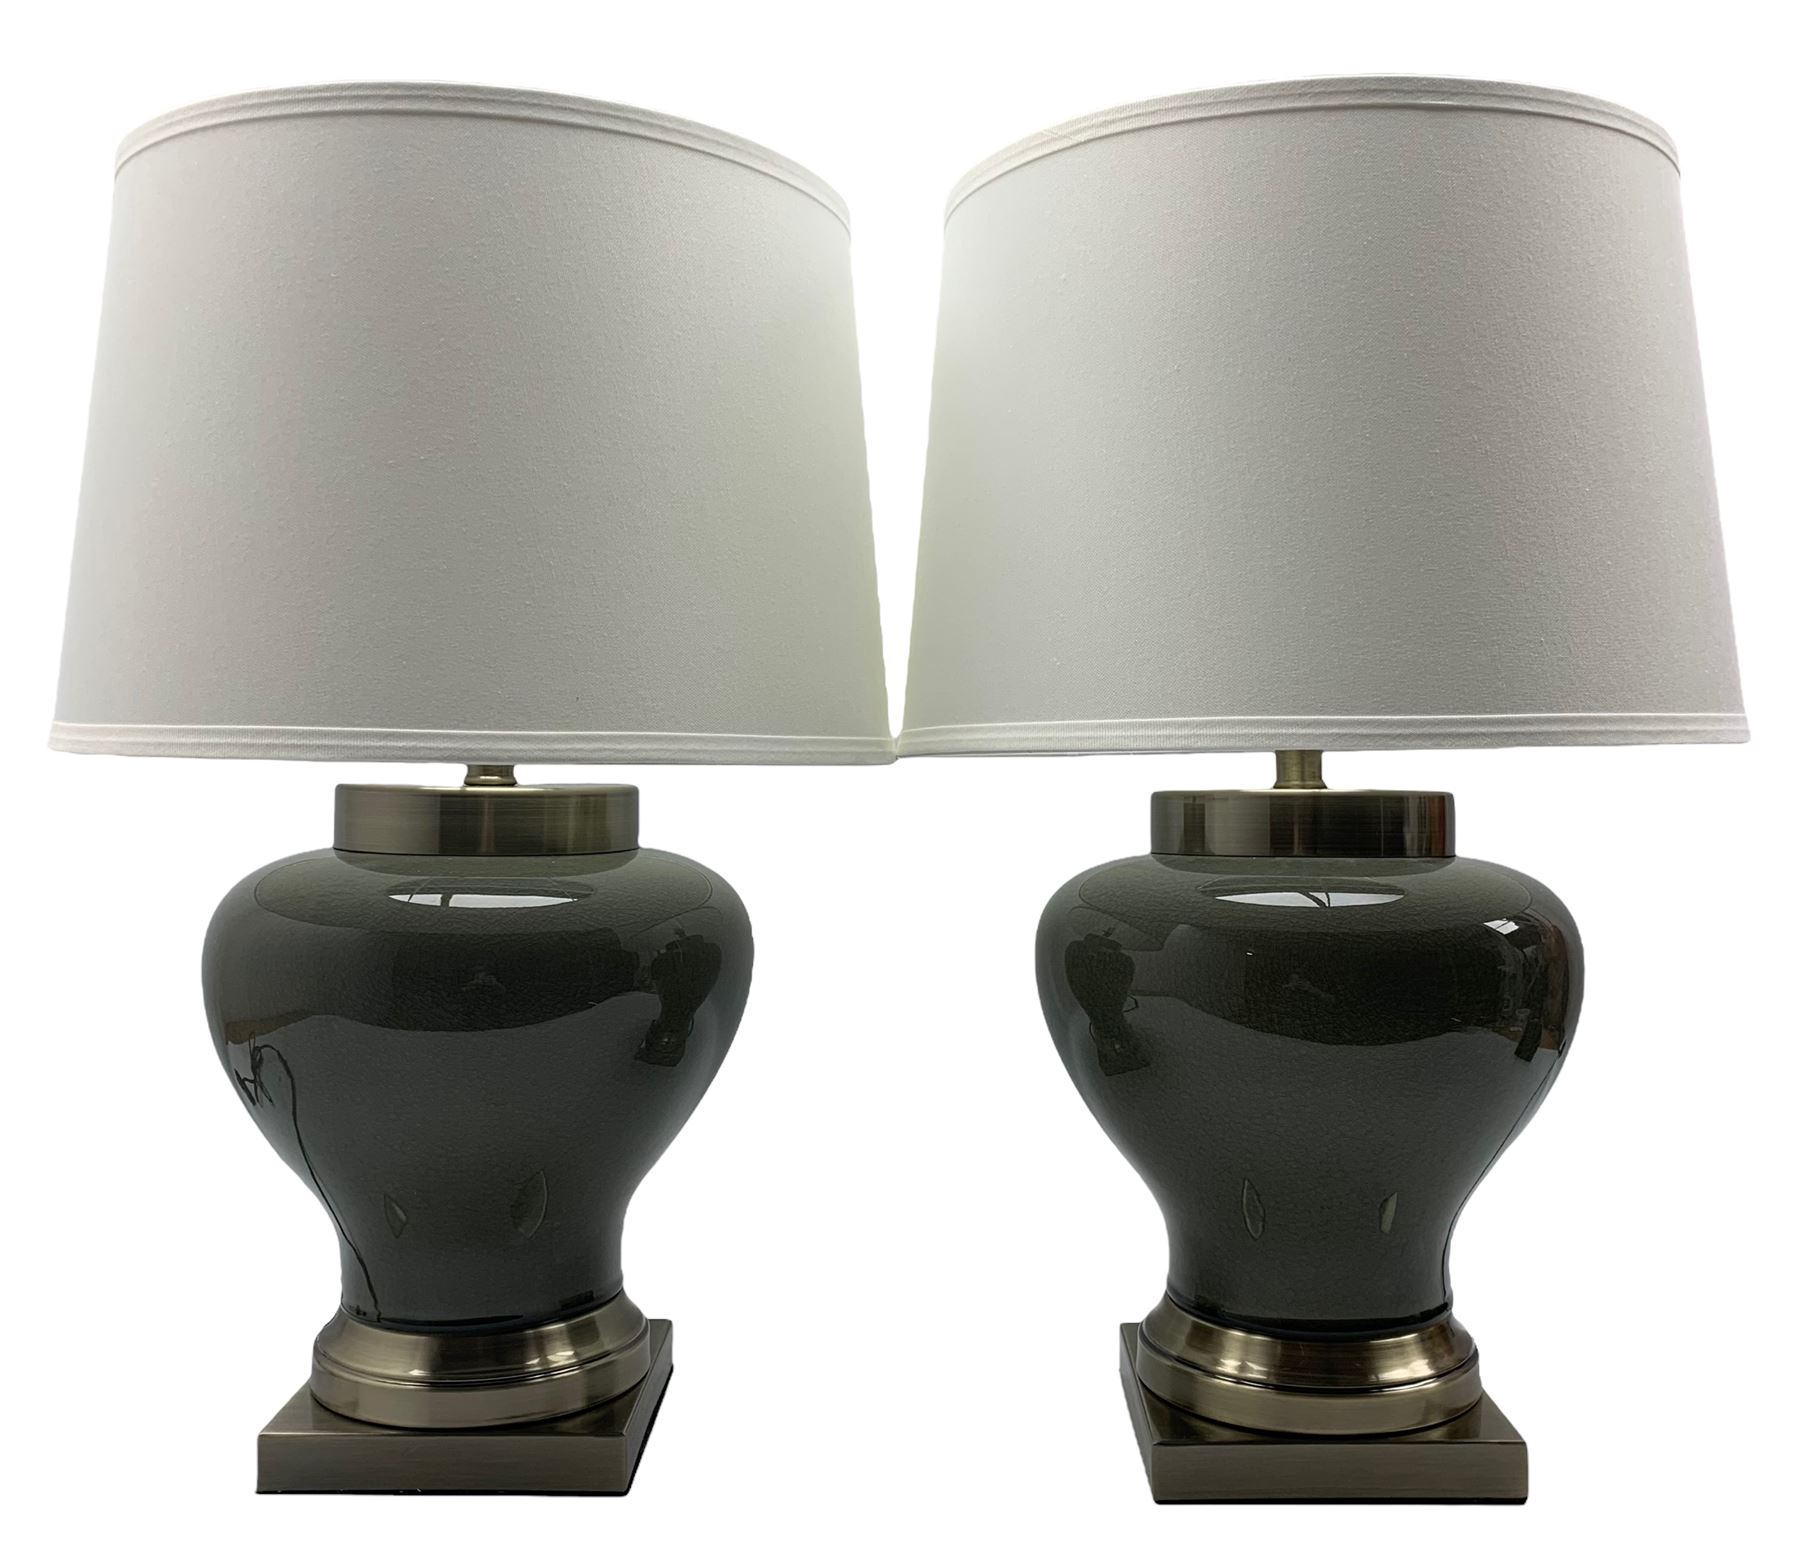 Pair of smokey crackle glazed table lamps